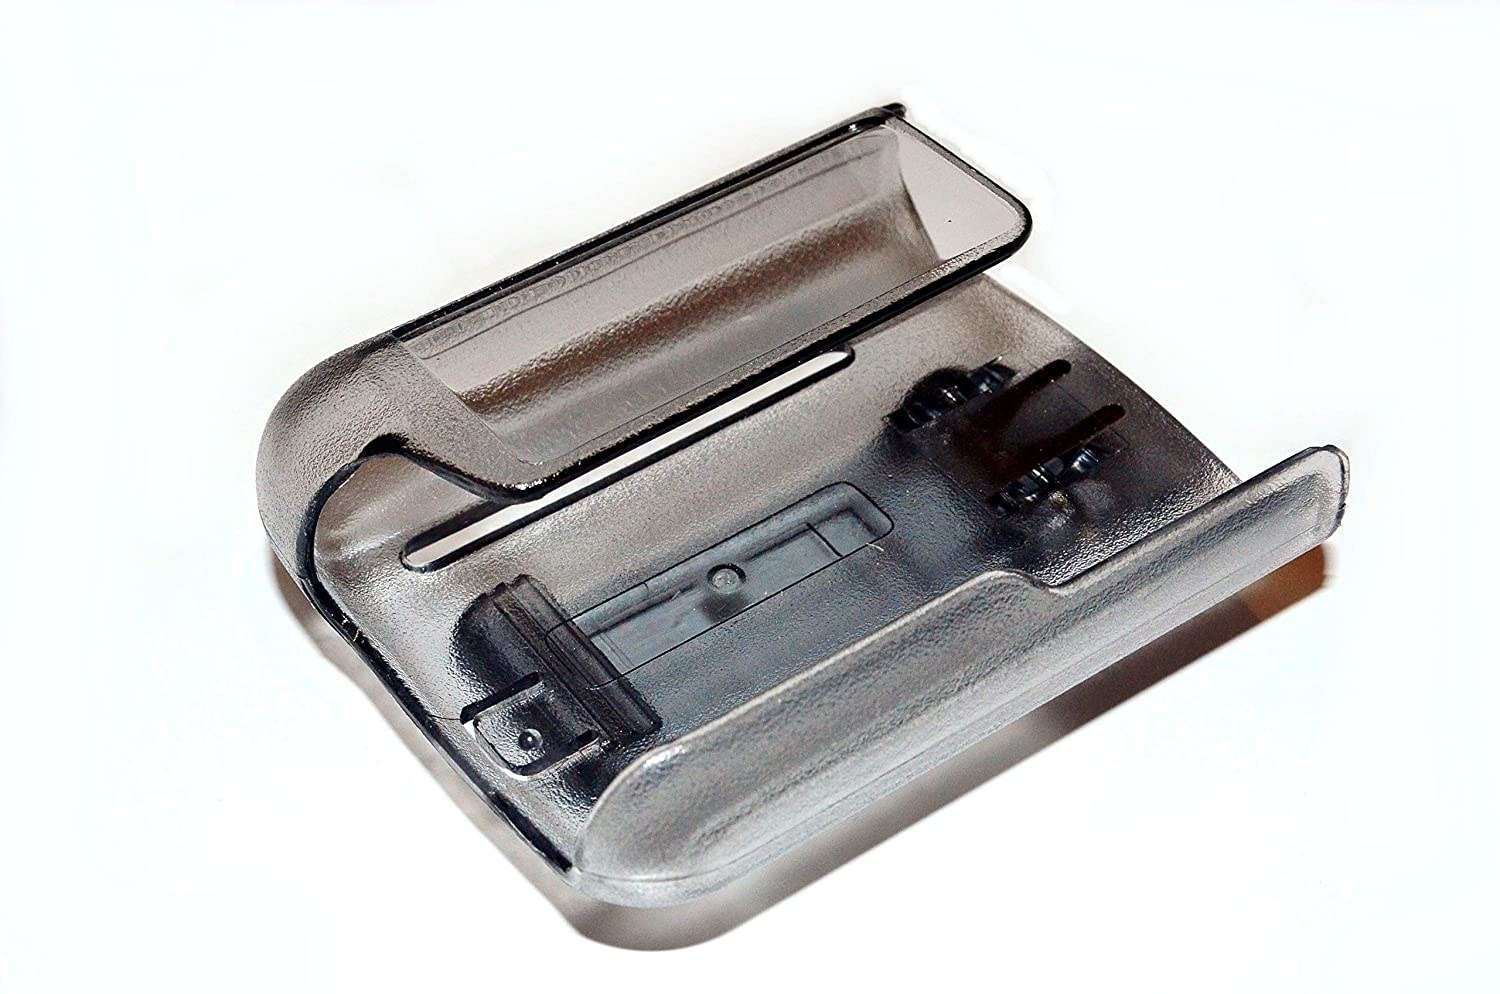 A gray plastic pager case